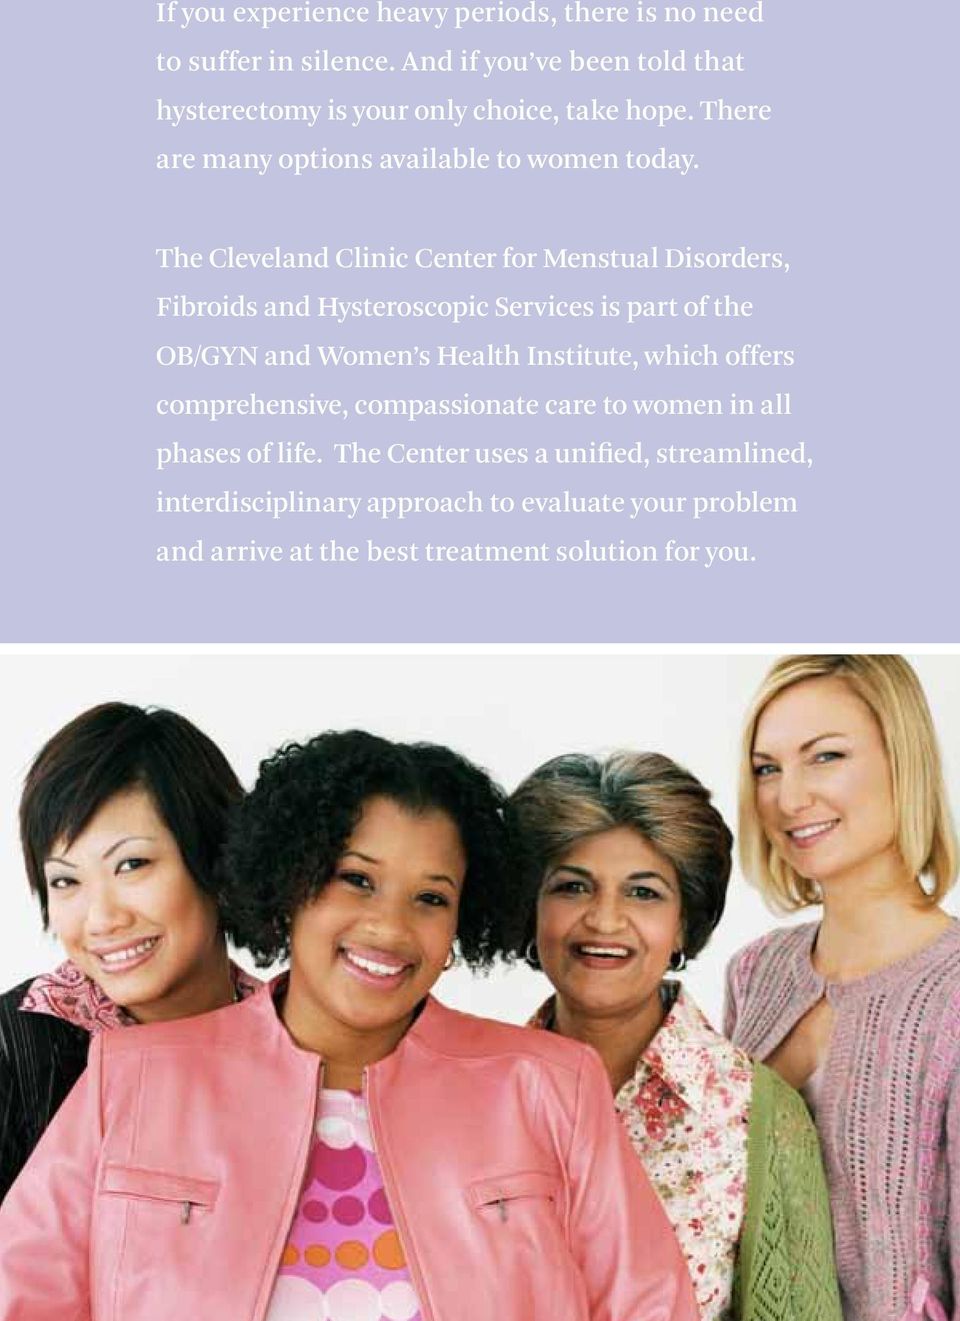 The Cleveland Clinic Center for Menstual Disorders, Fibroids and Hysteroscopic Services is part of the OB/GYN and Women s Health